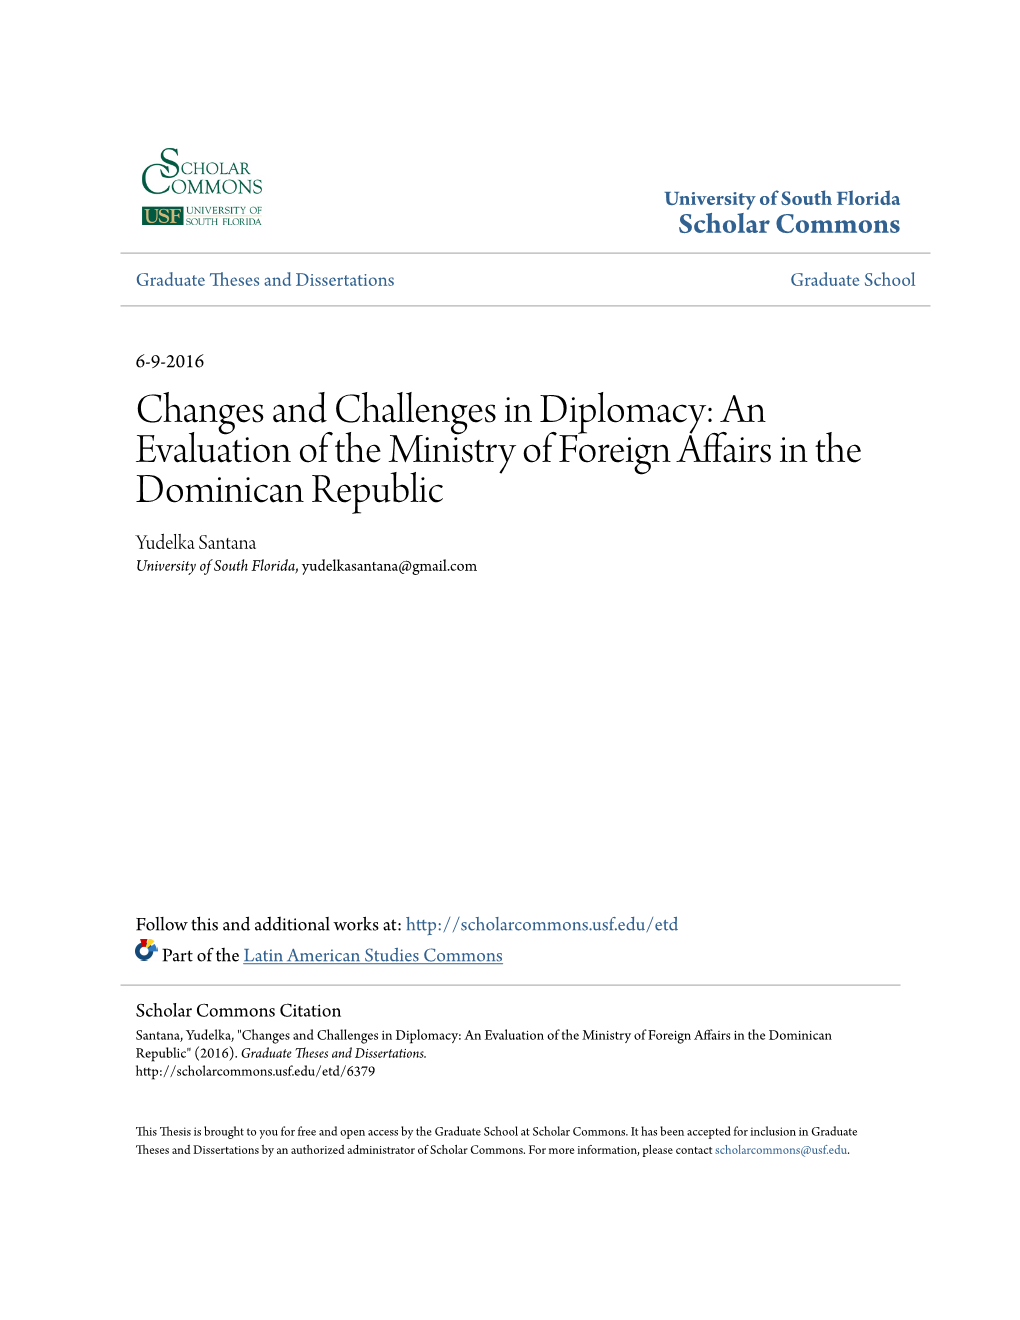 Changes and Challenges in Diplomacy: an Evaluation of the Ministry of Foreign Affairs in the Dominican Republic